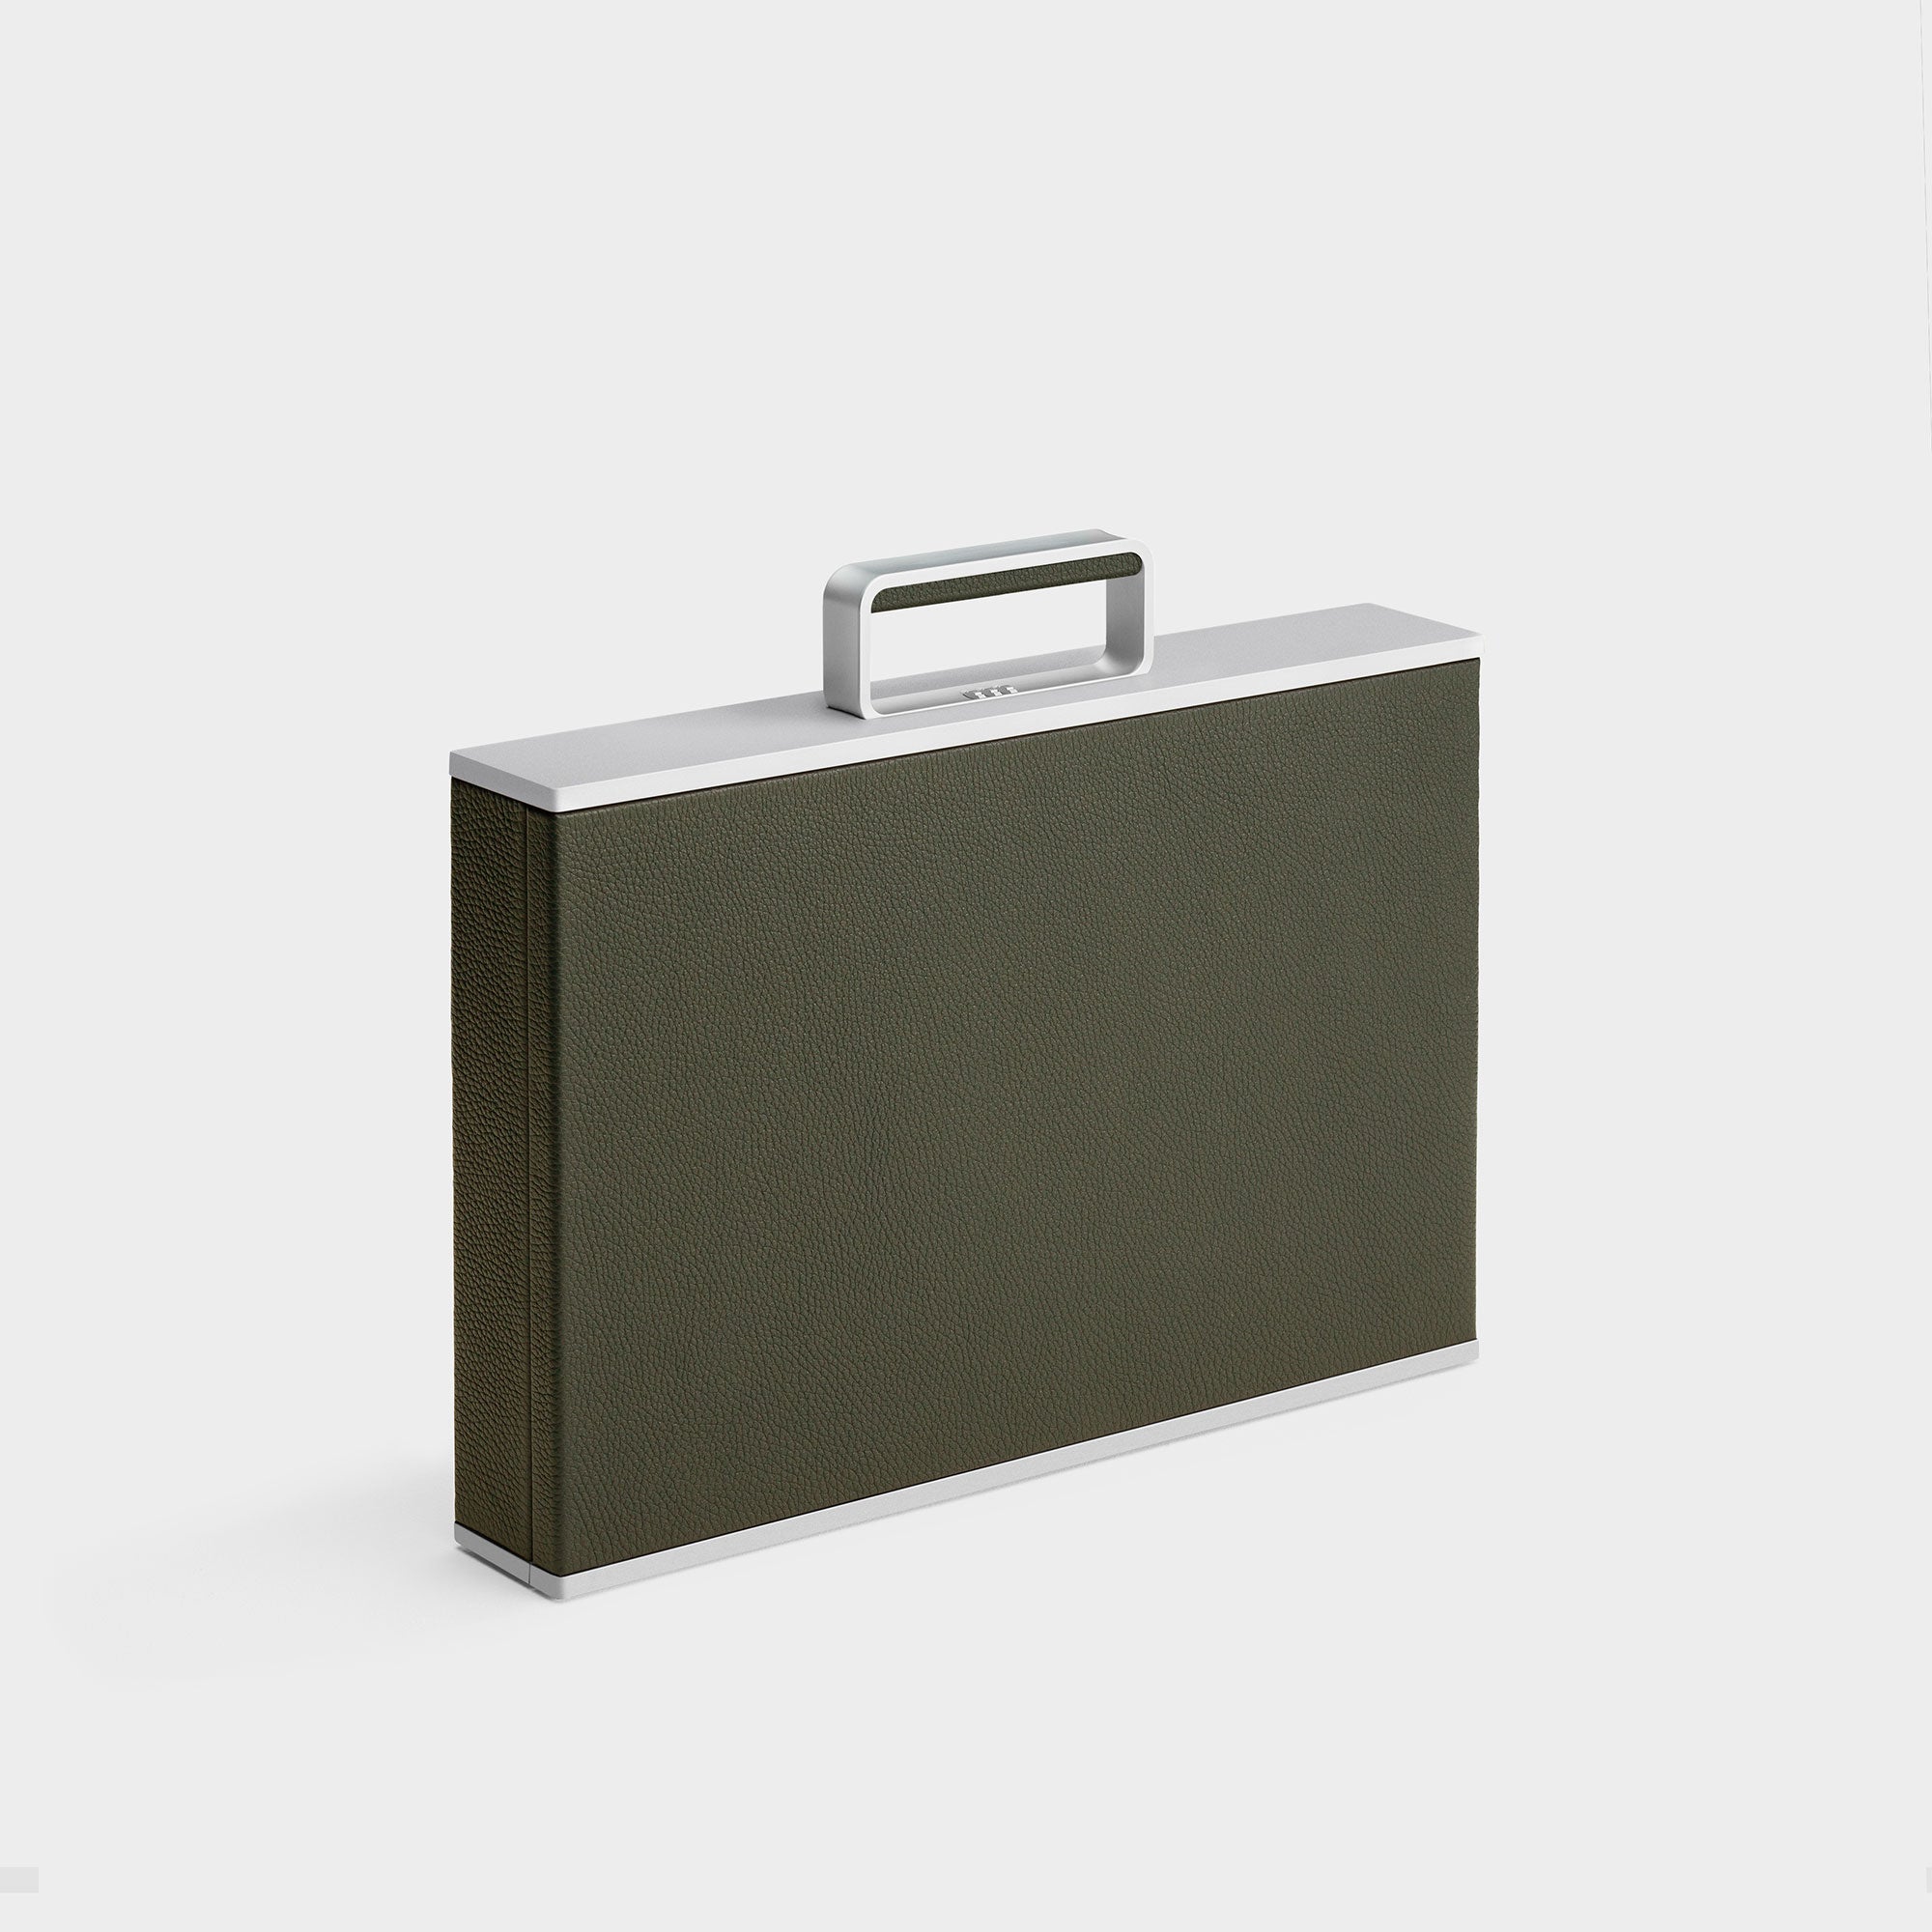 Handmade briefcase in khaki leather by Charles Simon